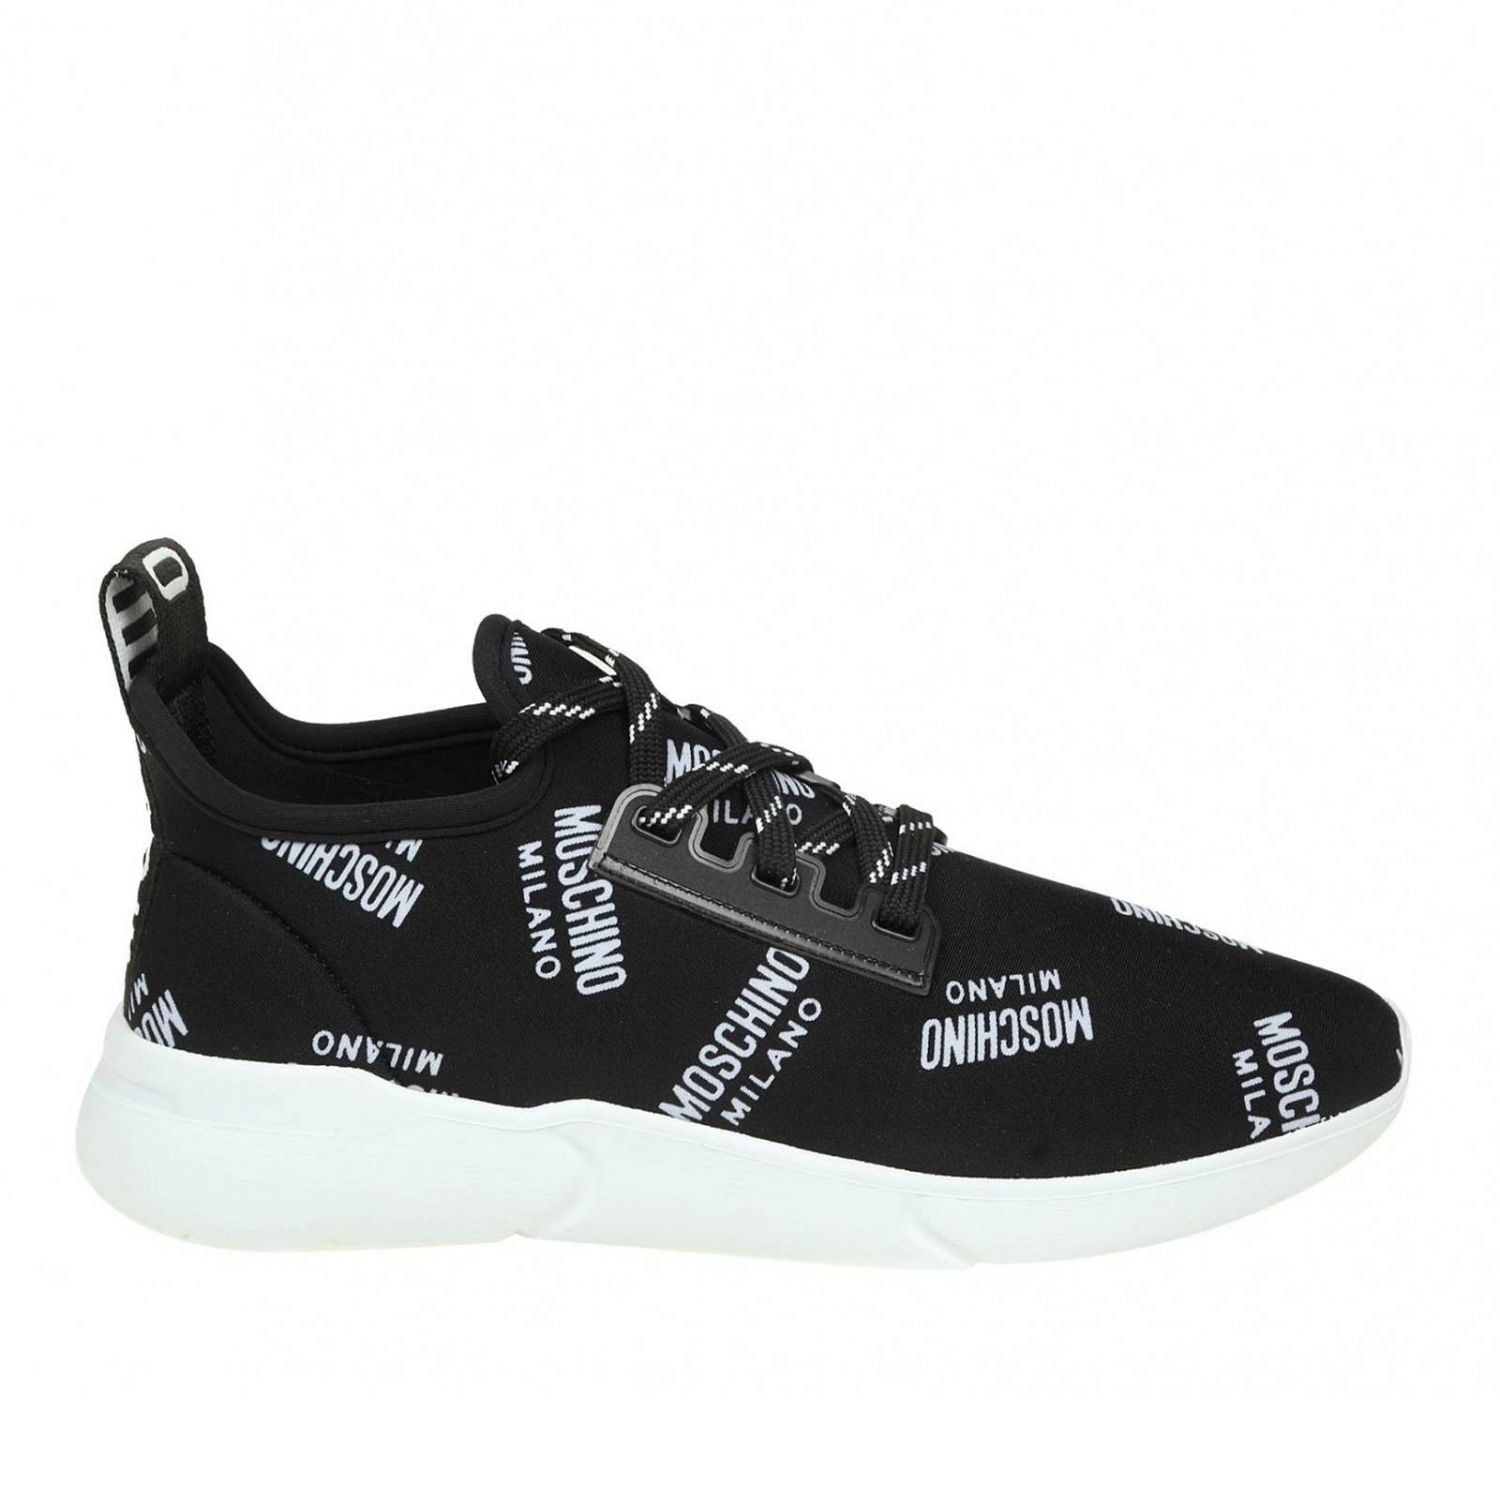 Moschino Couture Outlet: Sneakers women | Sneakers Moschino Couture ...